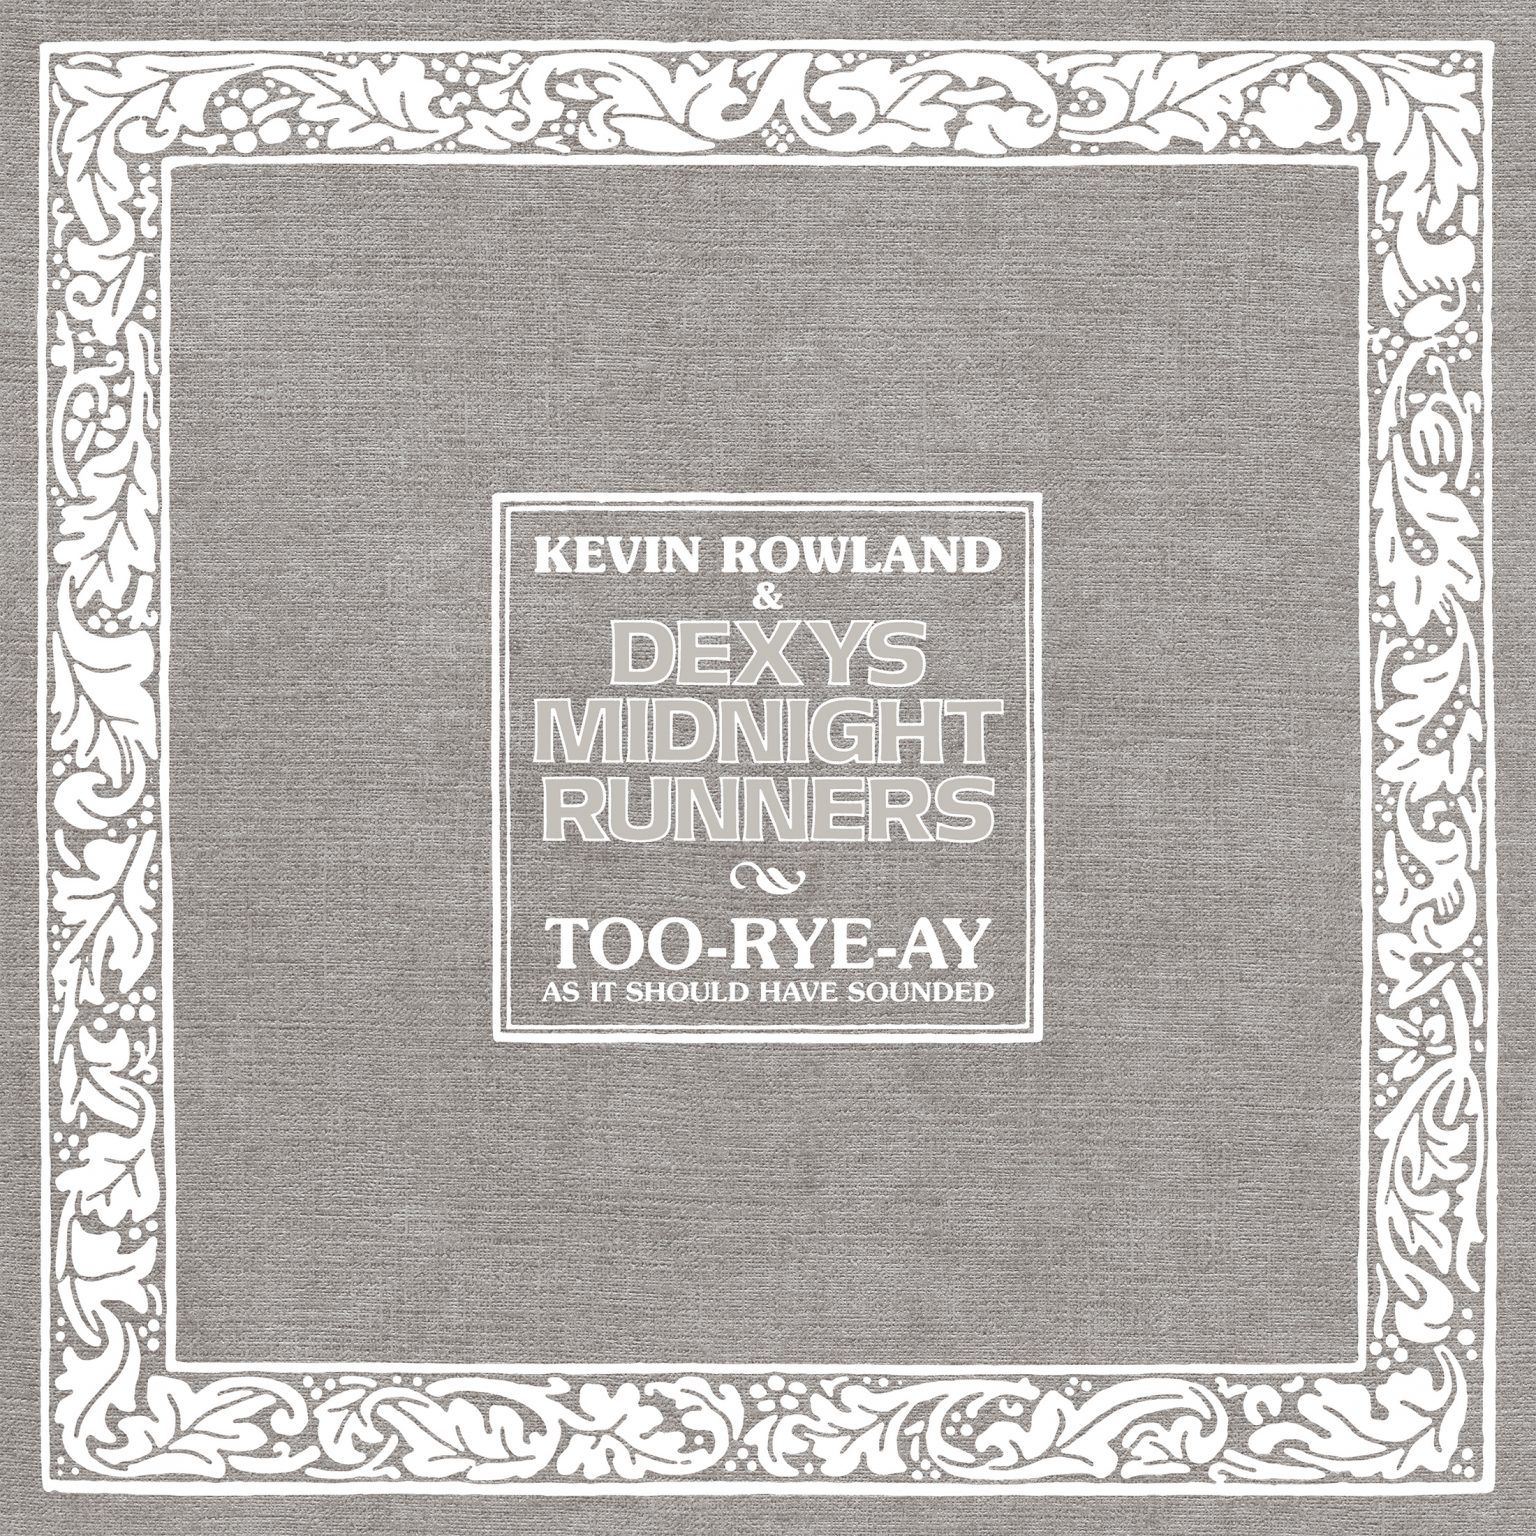 Kevin Rowland and Dexys Midnight Runners Too-Rye-Ay Boxset Cover